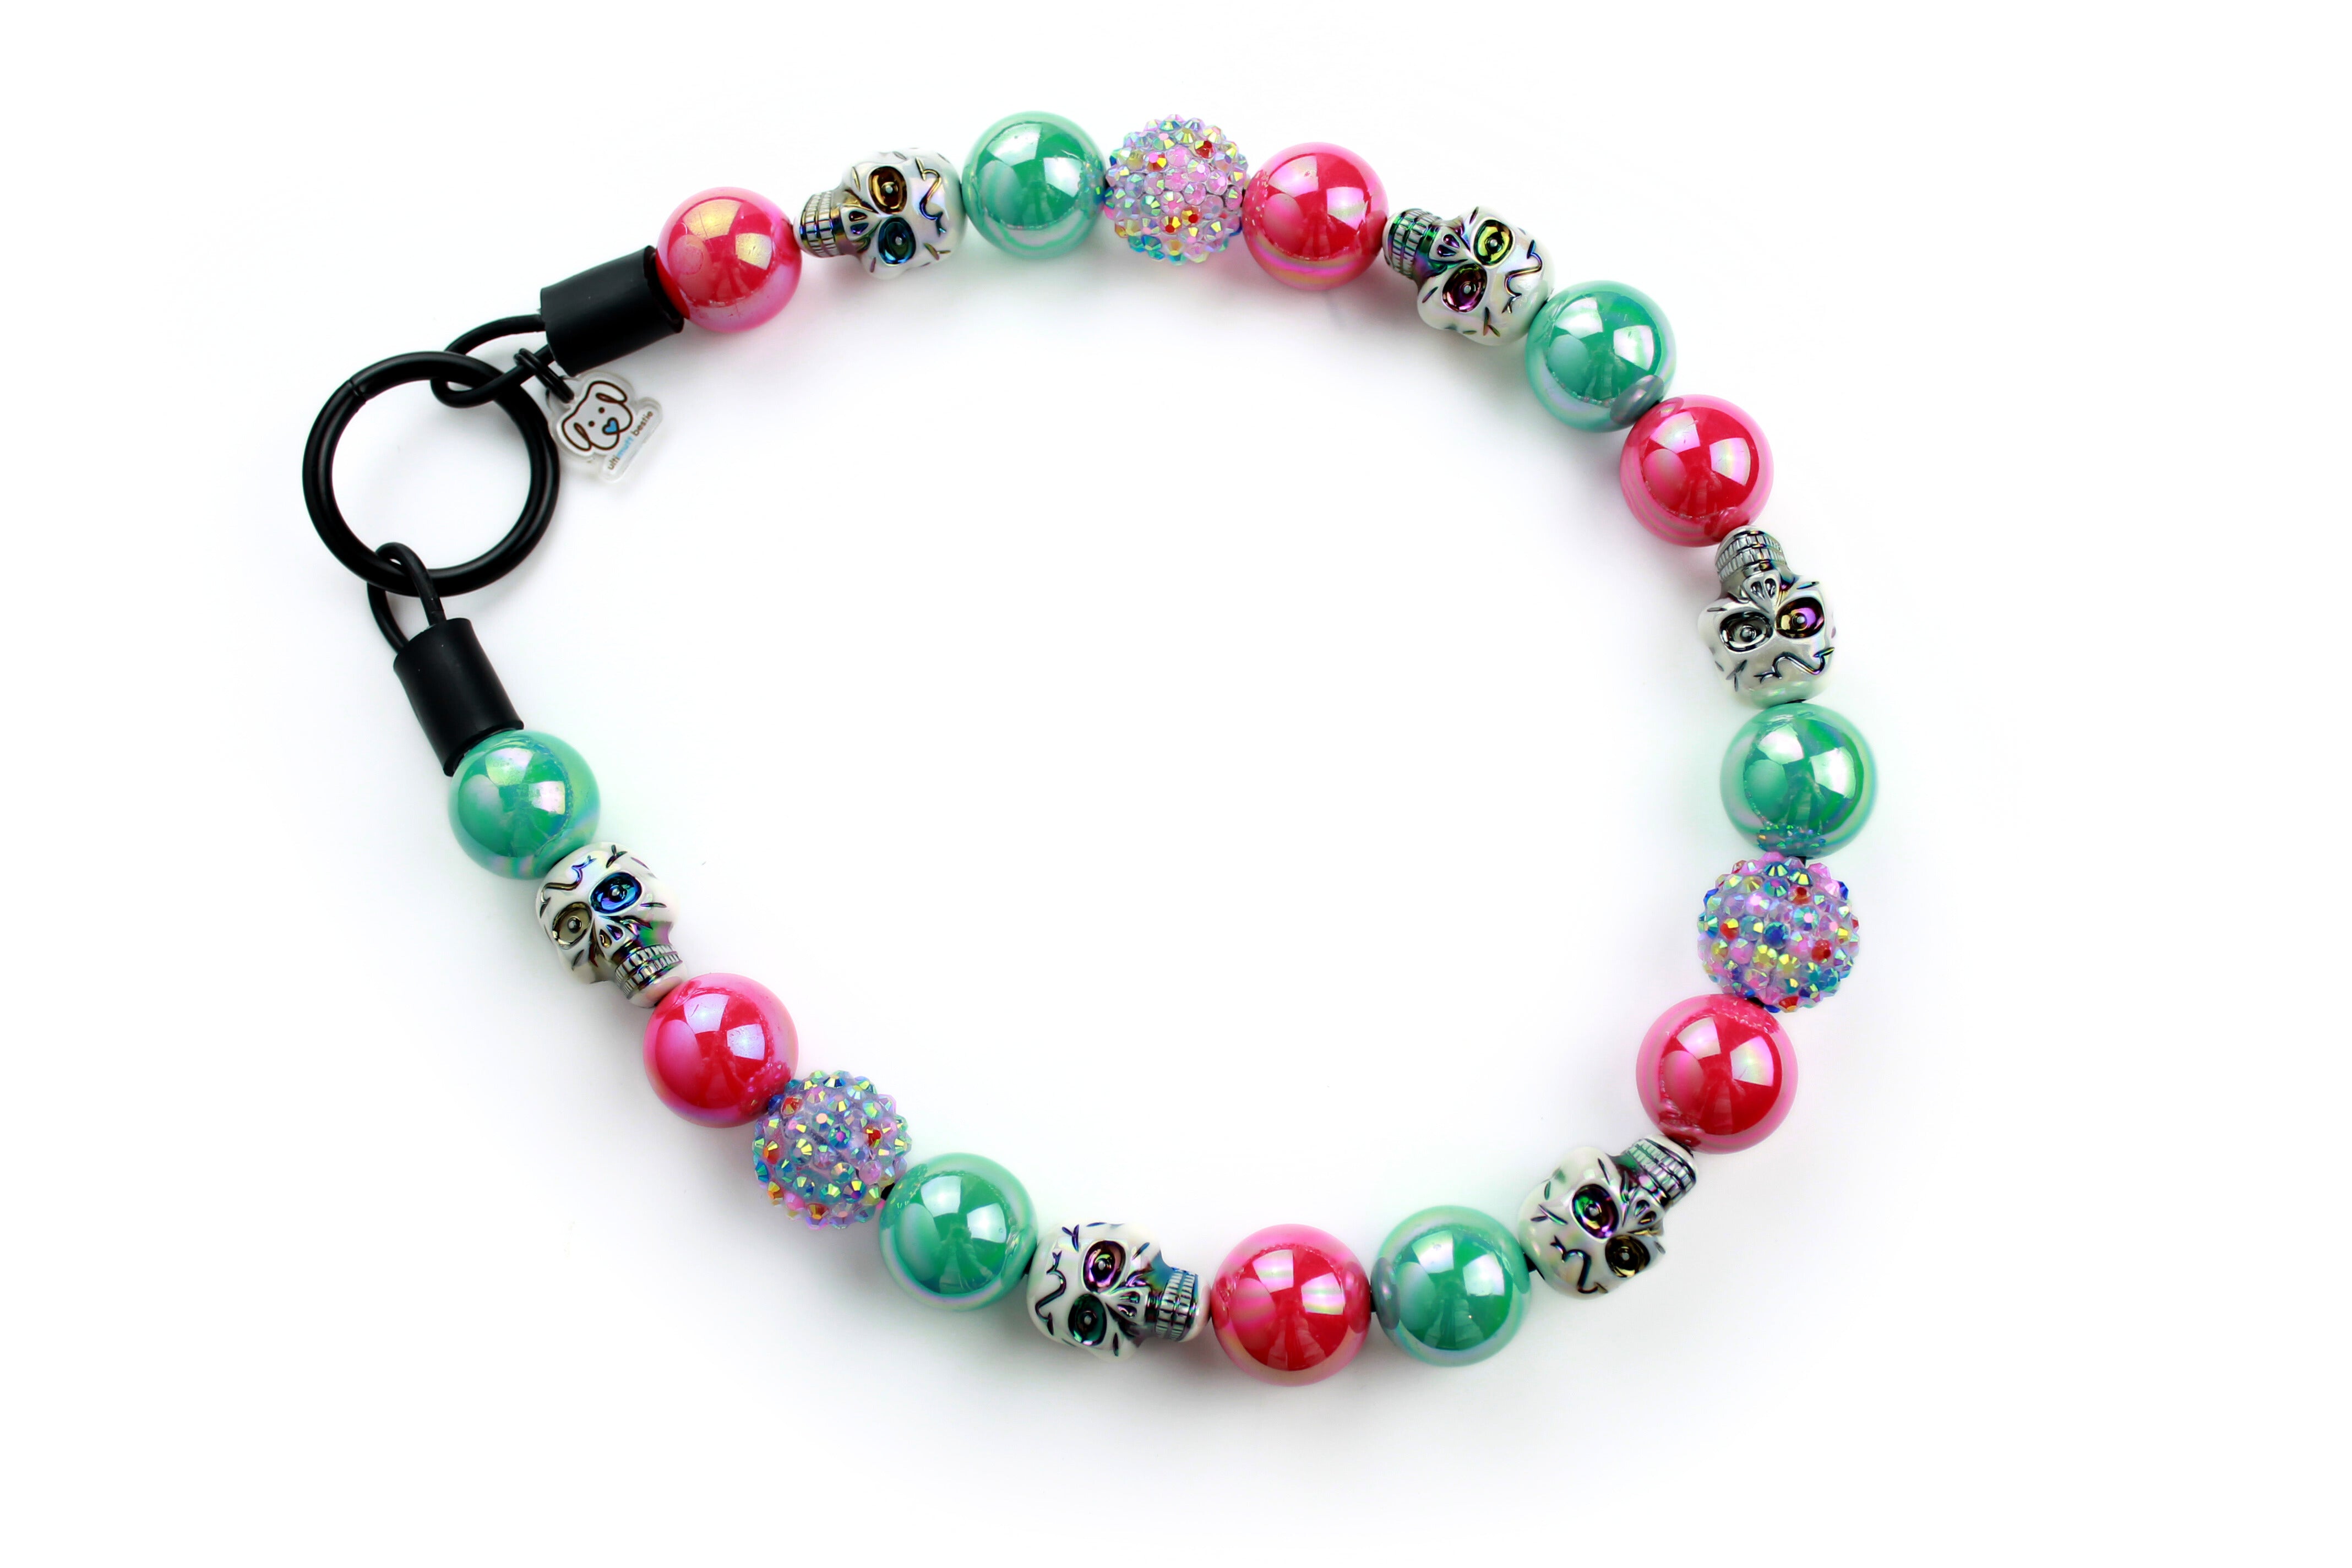 Hot pink and aqua miracle beads with iridescent white skulls